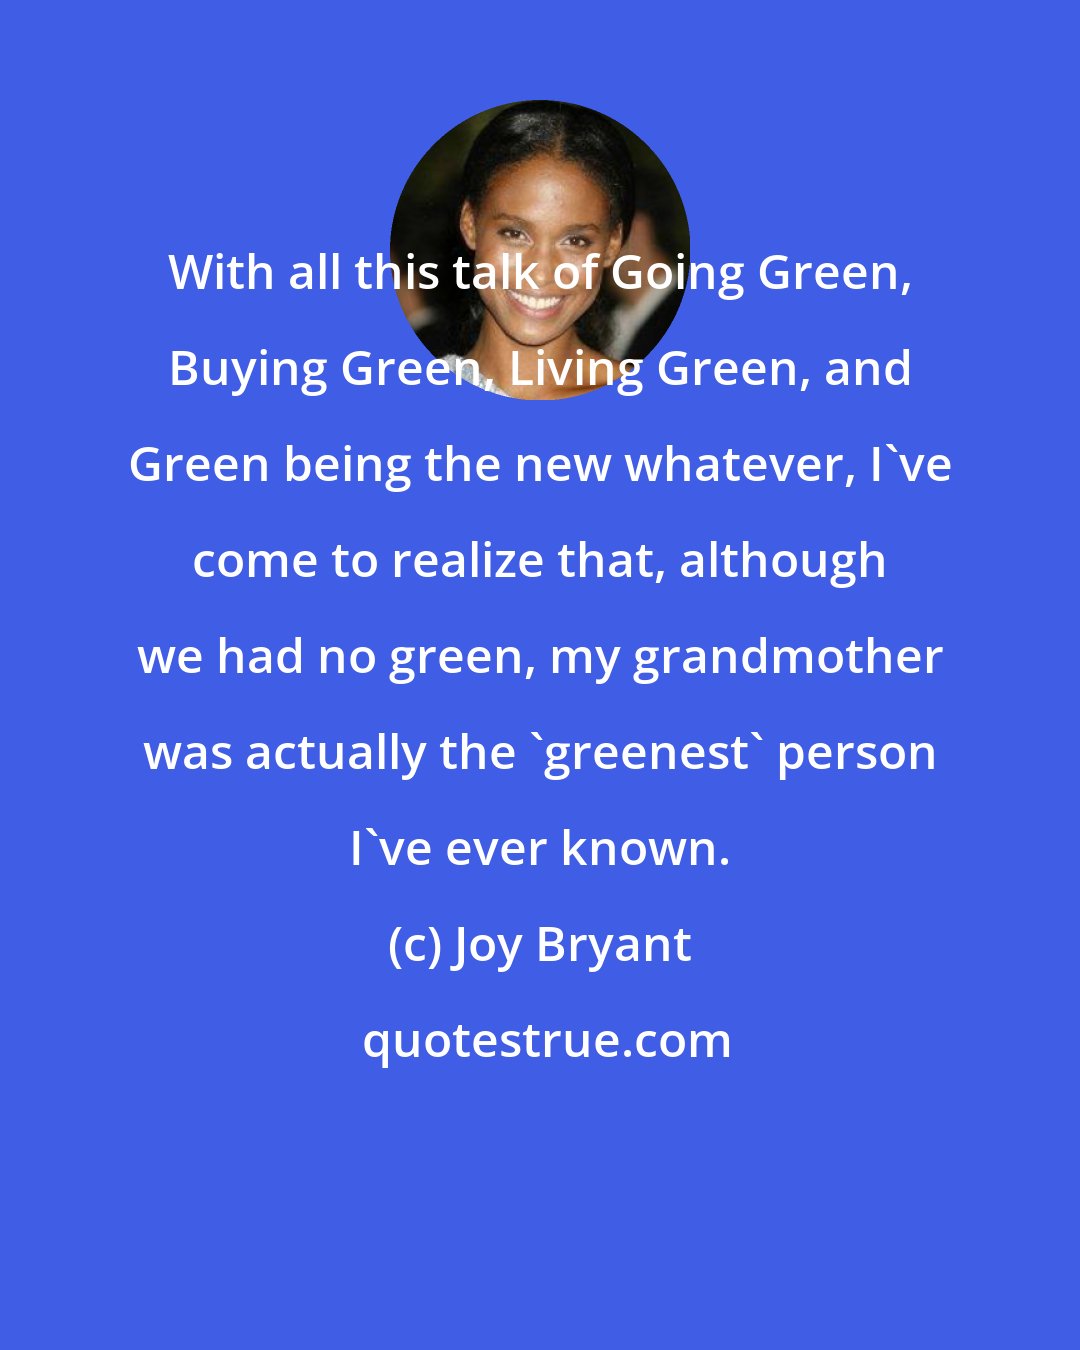 Joy Bryant: With all this talk of Going Green, Buying Green, Living Green, and Green being the new whatever, I've come to realize that, although we had no green, my grandmother was actually the 'greenest' person I've ever known.